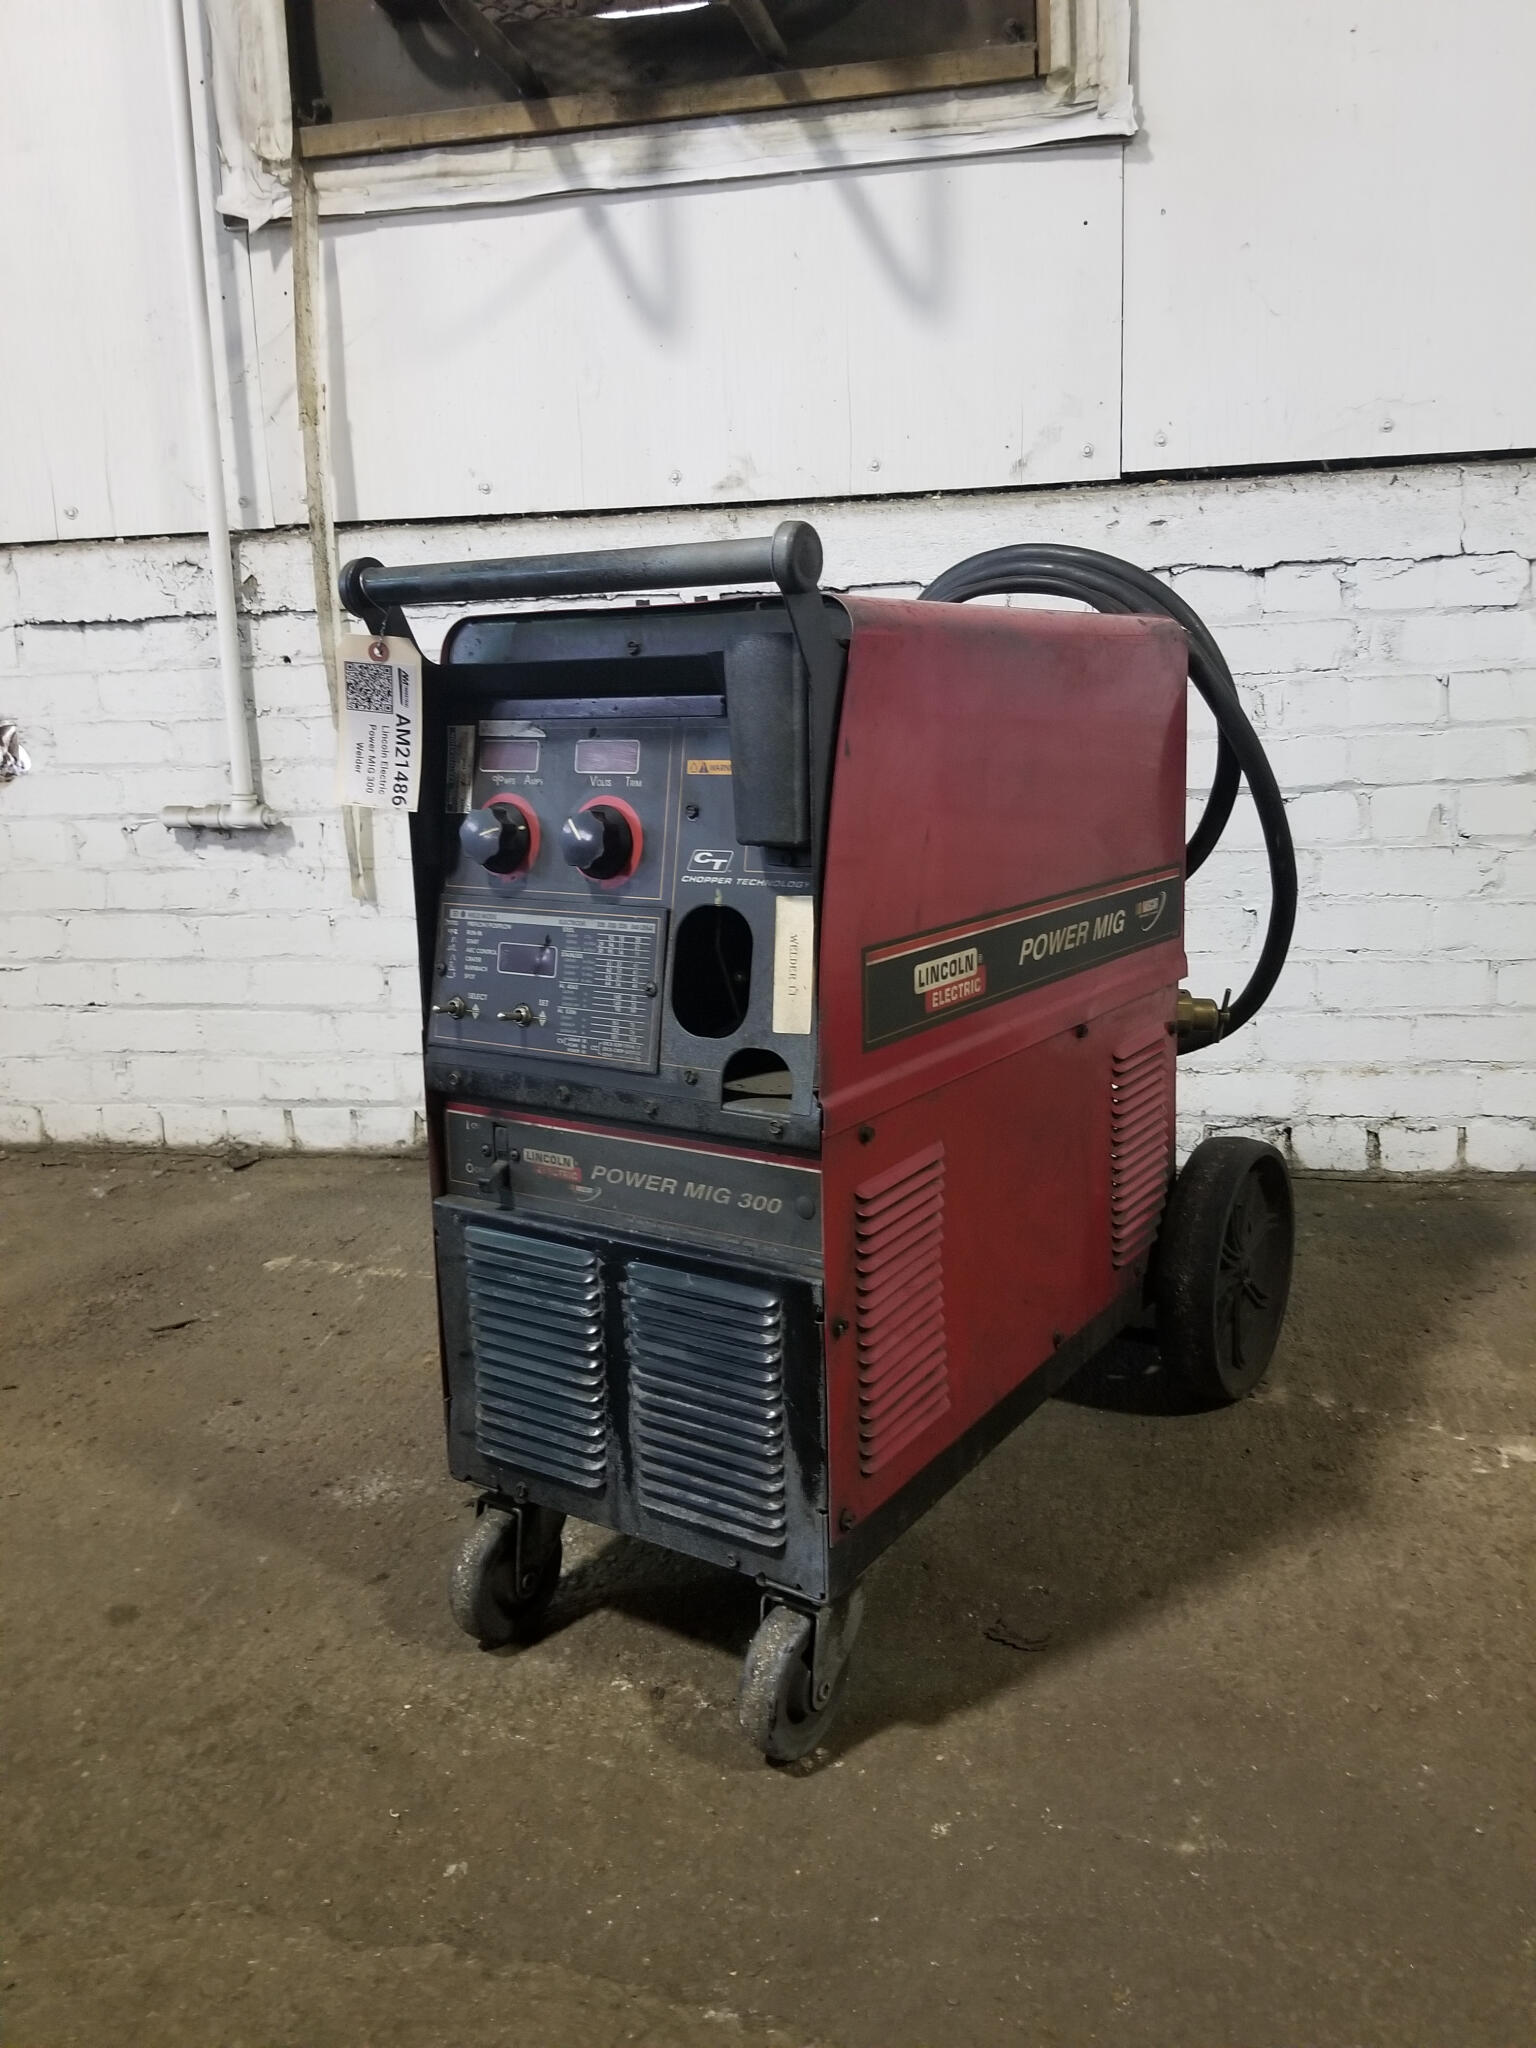 Lincoln Electric #Power MIG 300 Welder